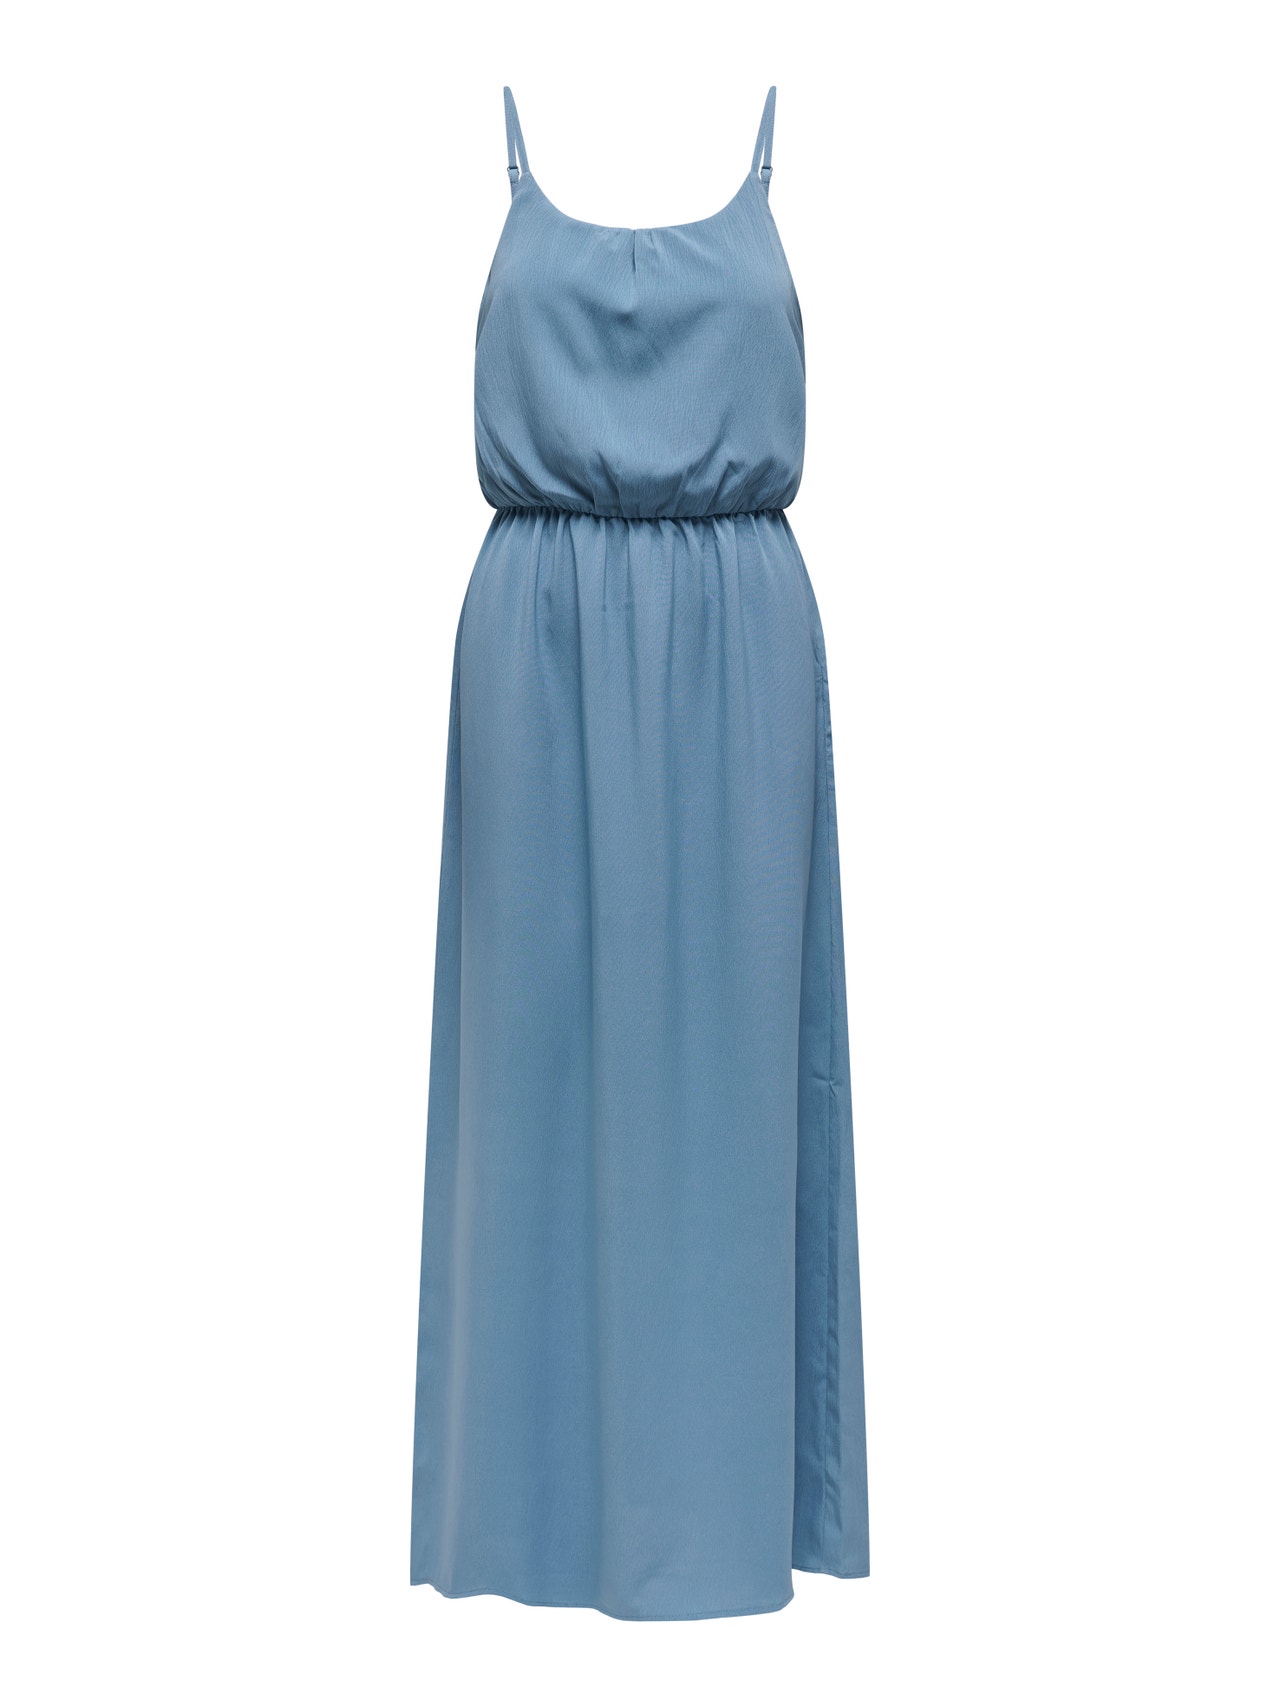 ONLY Midi dress with shoulder straps -Coronet Blue - 15335556